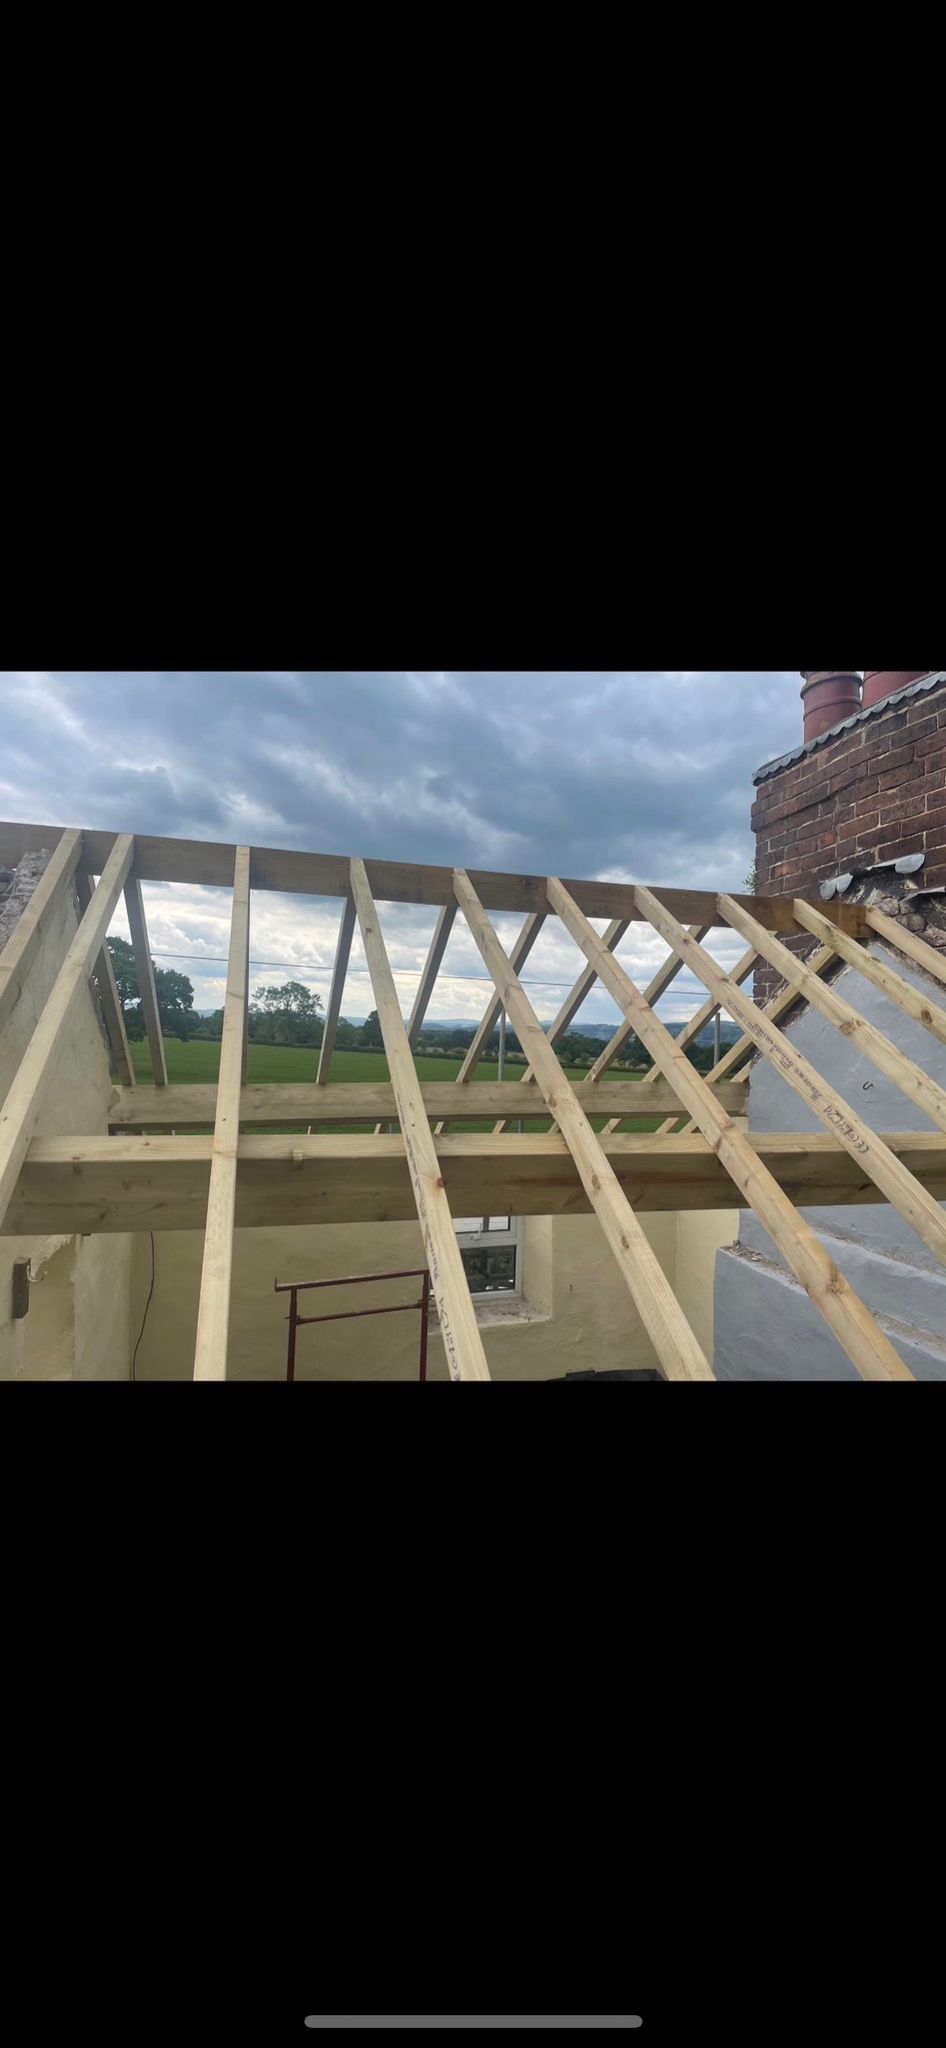 Timberwork Roof Contractors Hên-durnpike, LL57 - DD Roofing